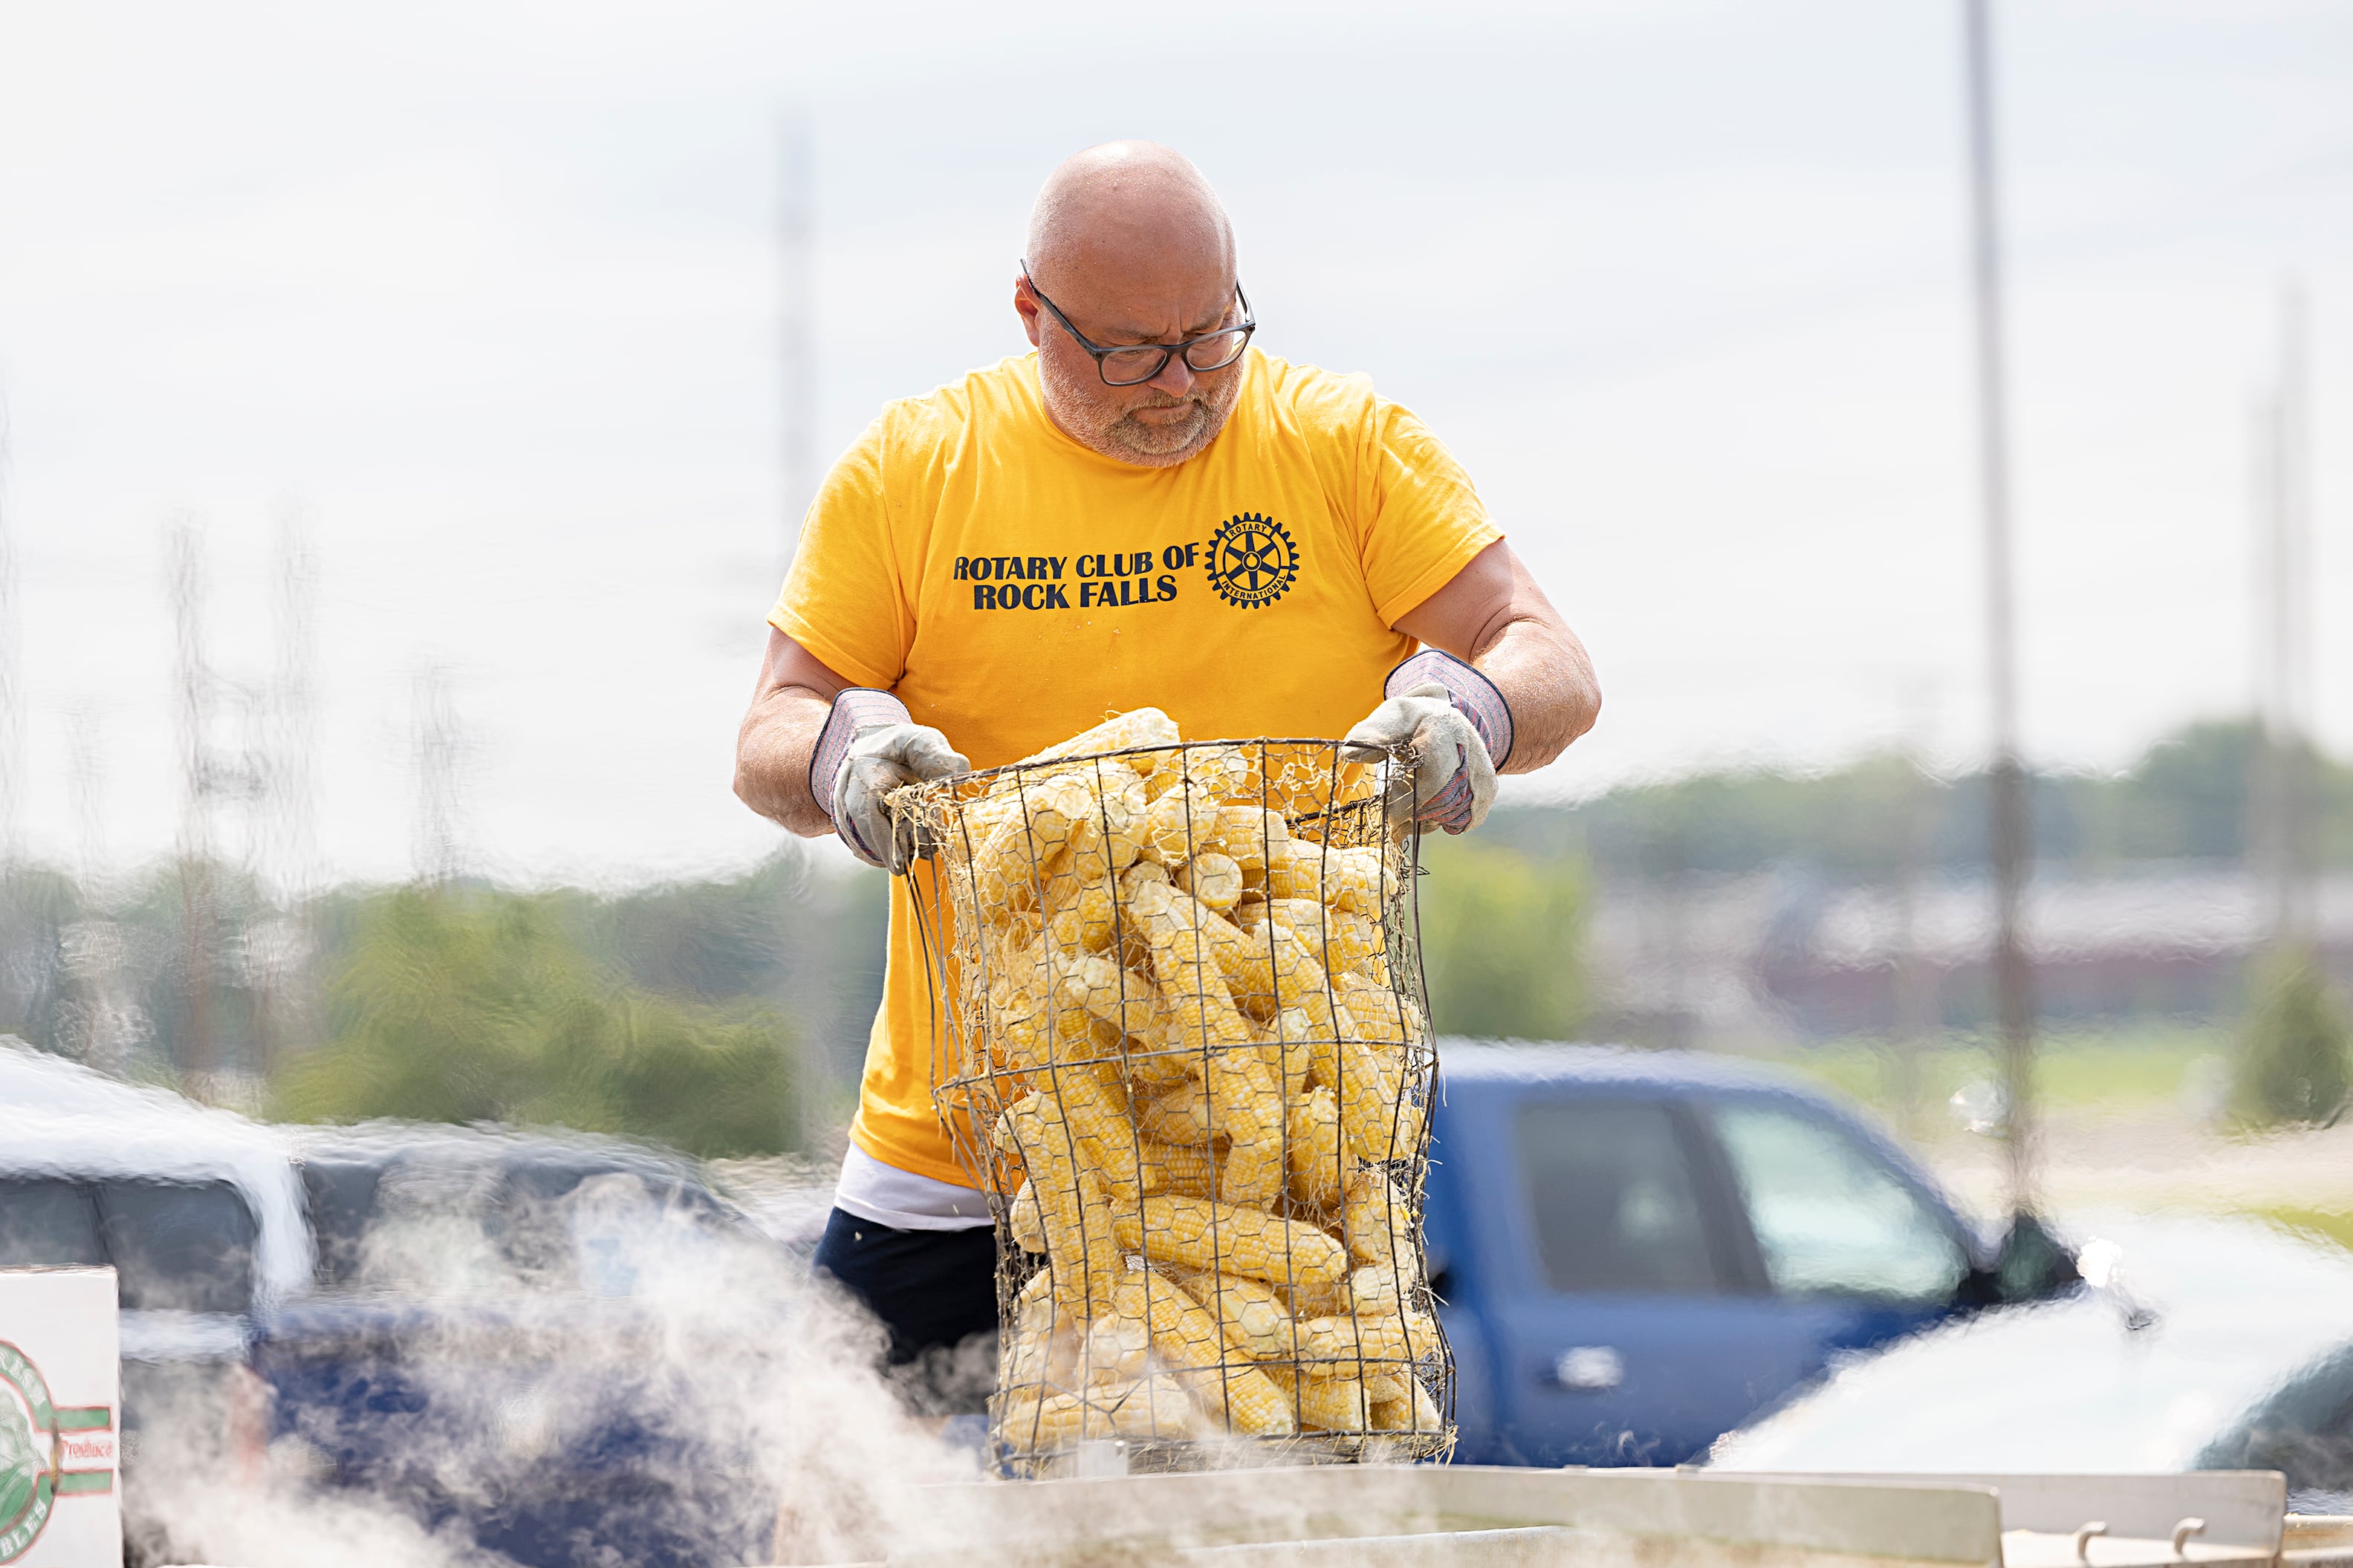 Photos: Sterling Noon and Rock Falls Rotary clubs host Broil and Boil Lunch